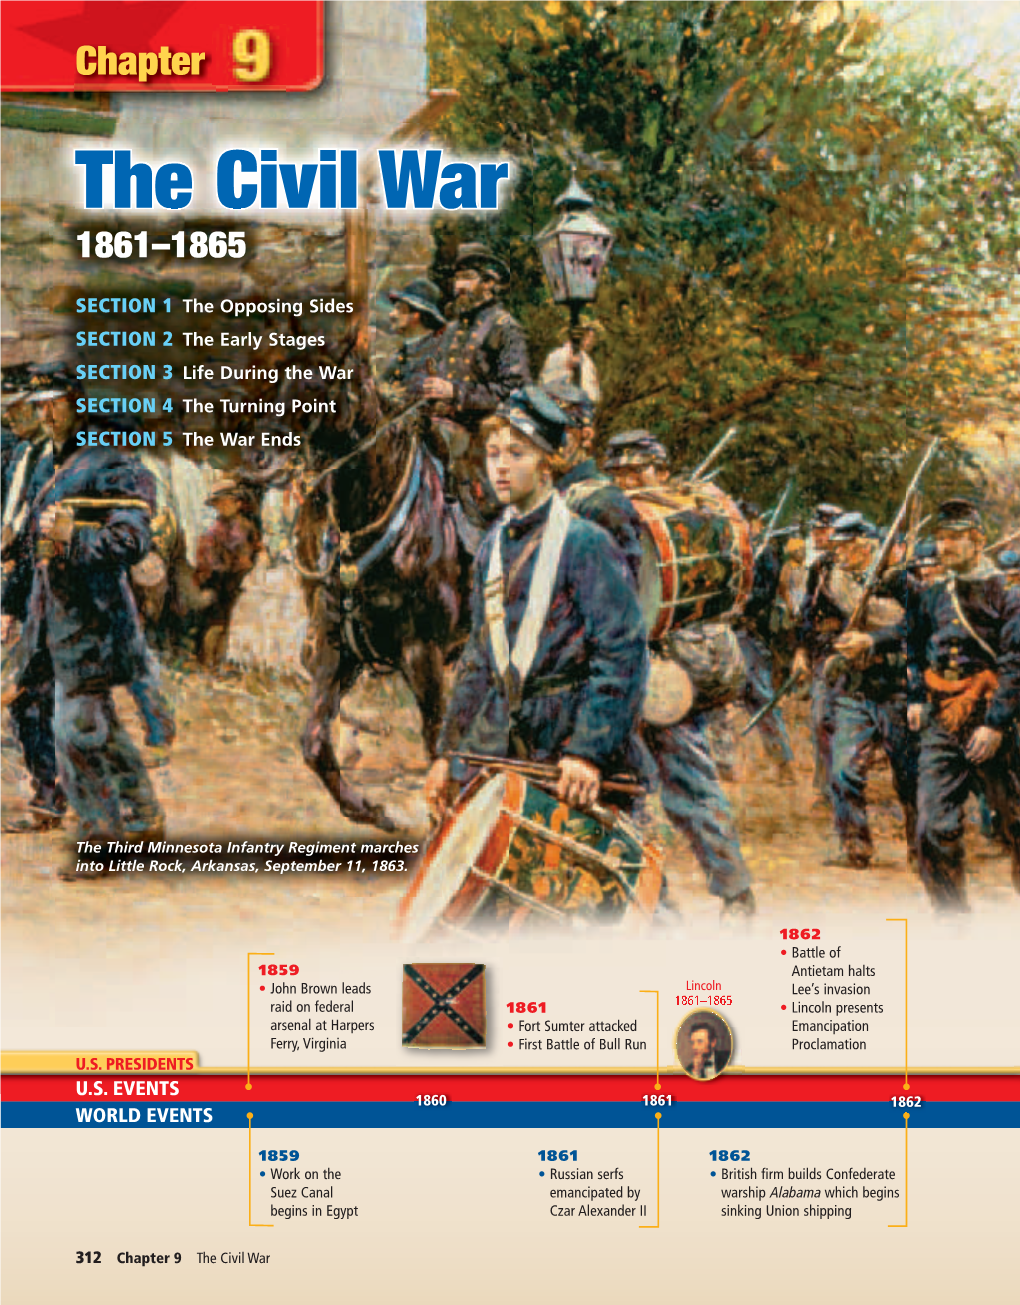 Chapter 9: the Civil War, 1861-1865